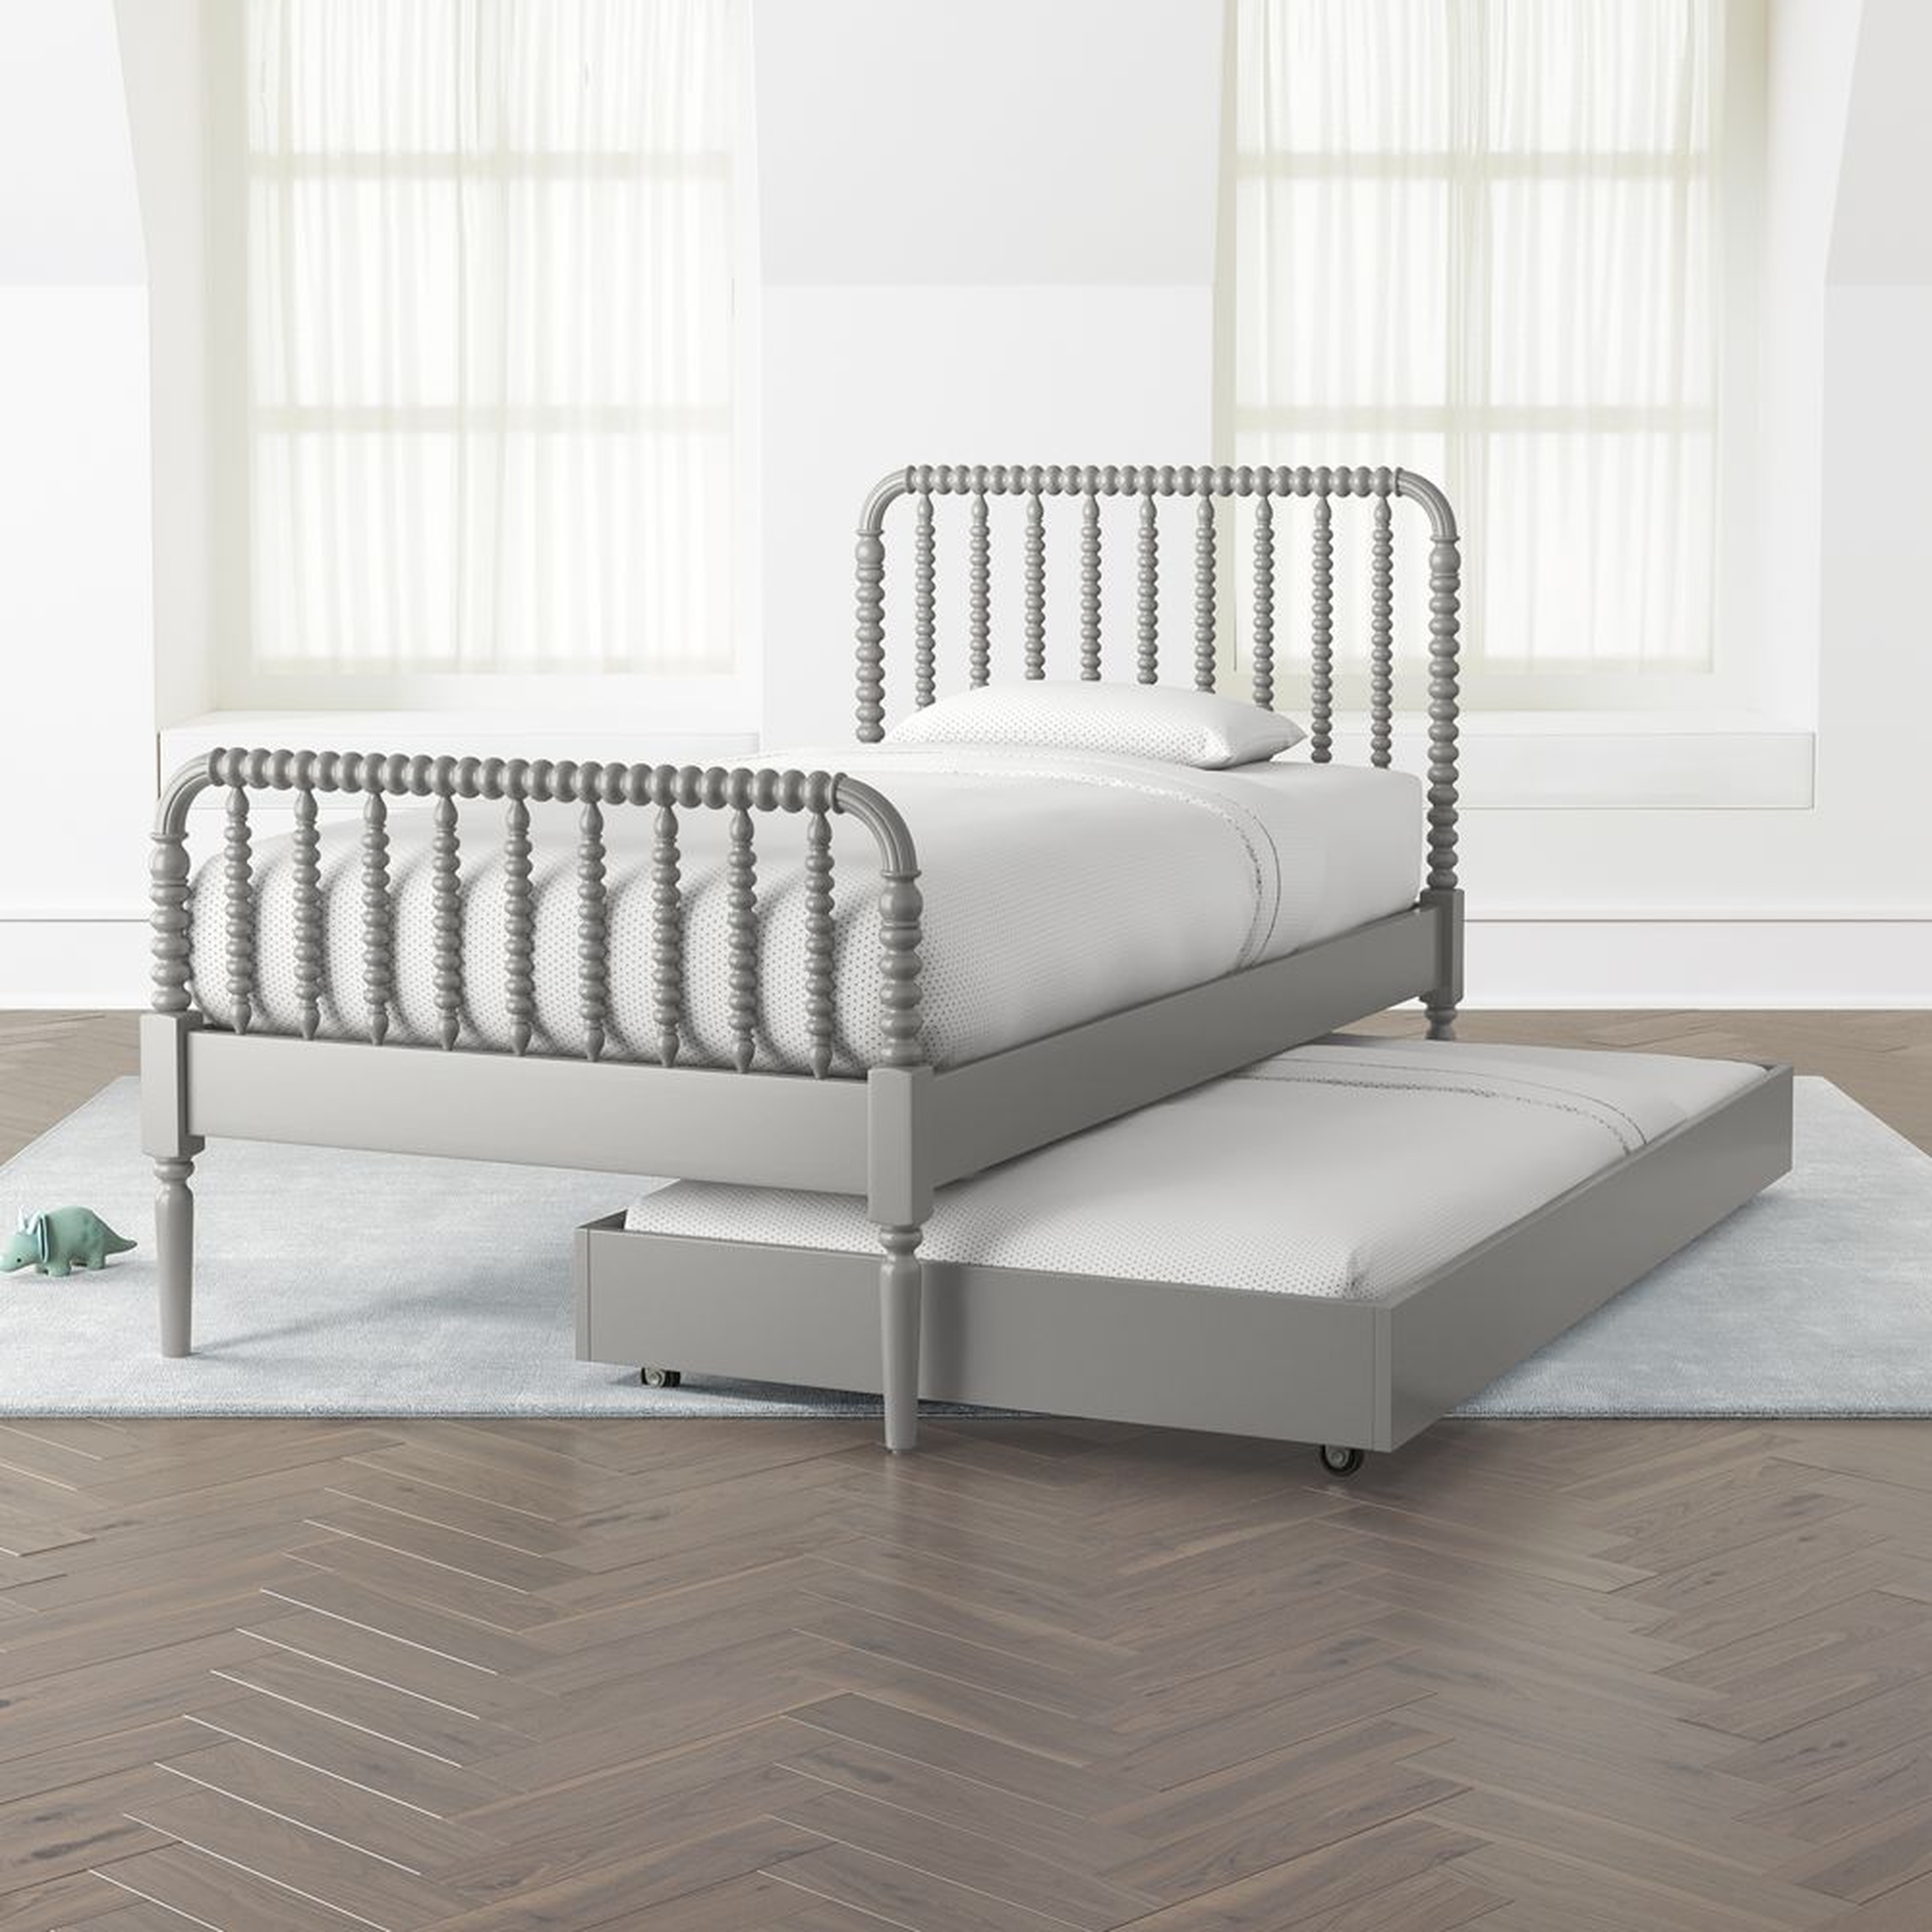 Jenny Lind Grey Trundle Bed - Crate and Barrel